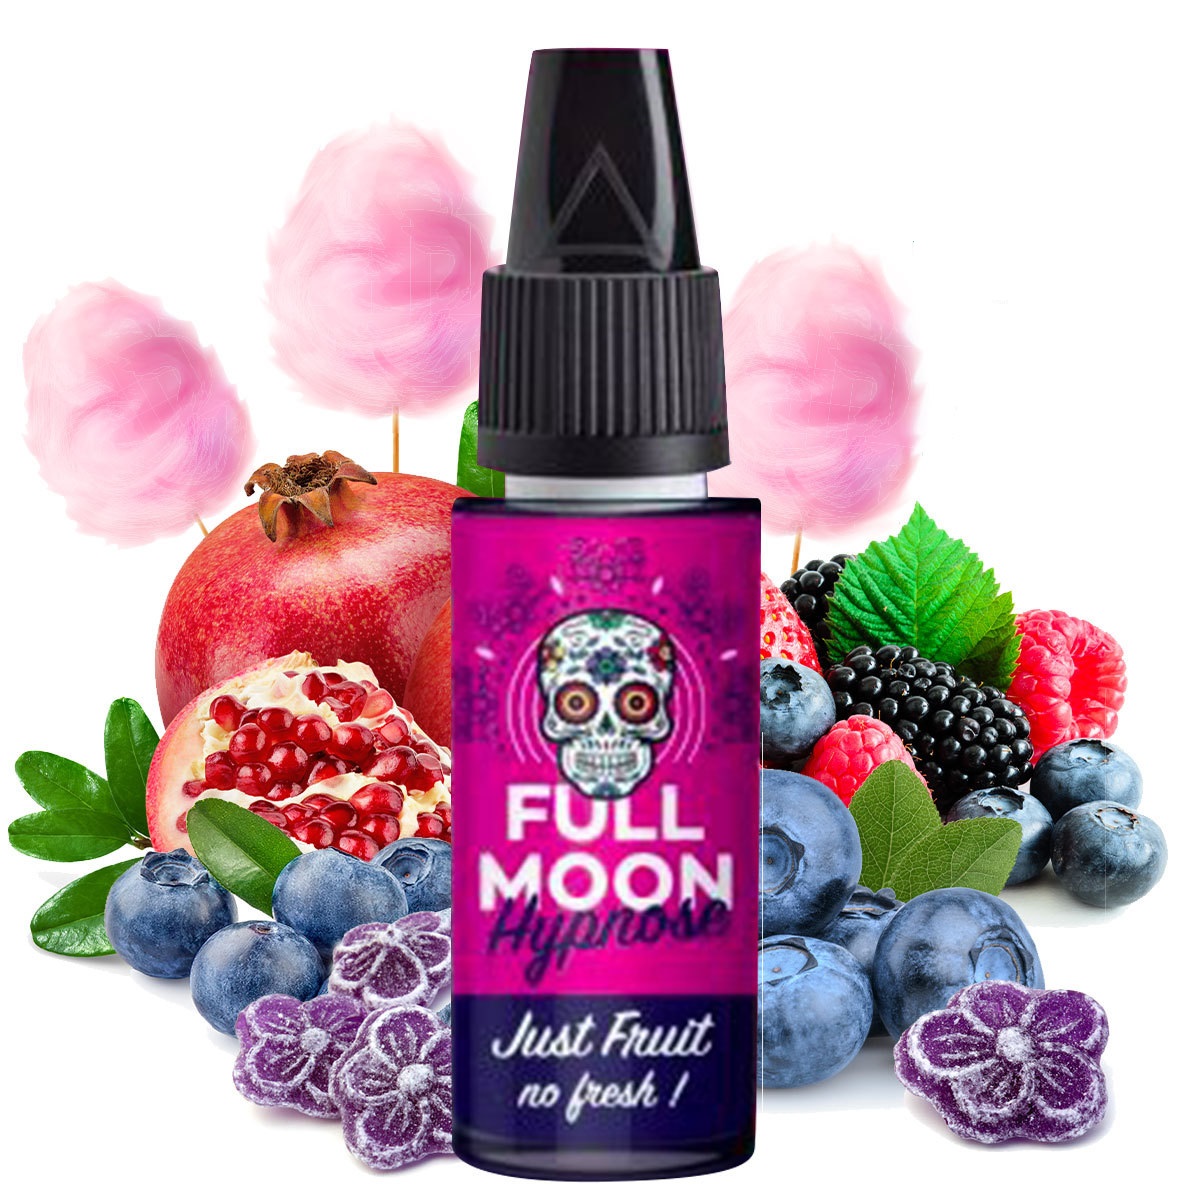 Full Moon Hypnose just fruit 10ml